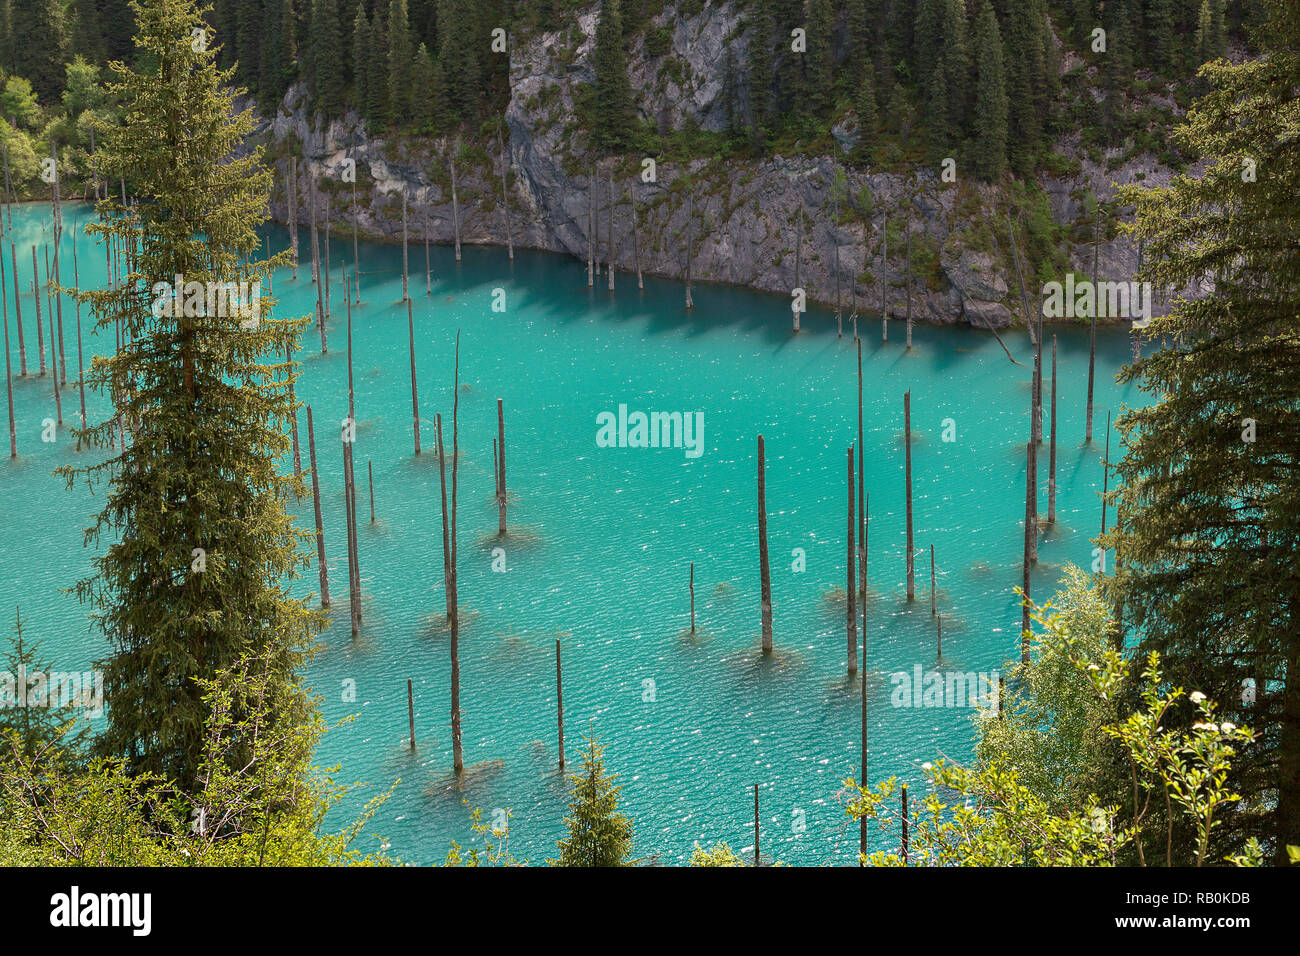 Kaindy Lake in Kazakhstan known also as Birch Tree Lake or Underwater forest, with tree trunks coming out of the water. Stock Photo